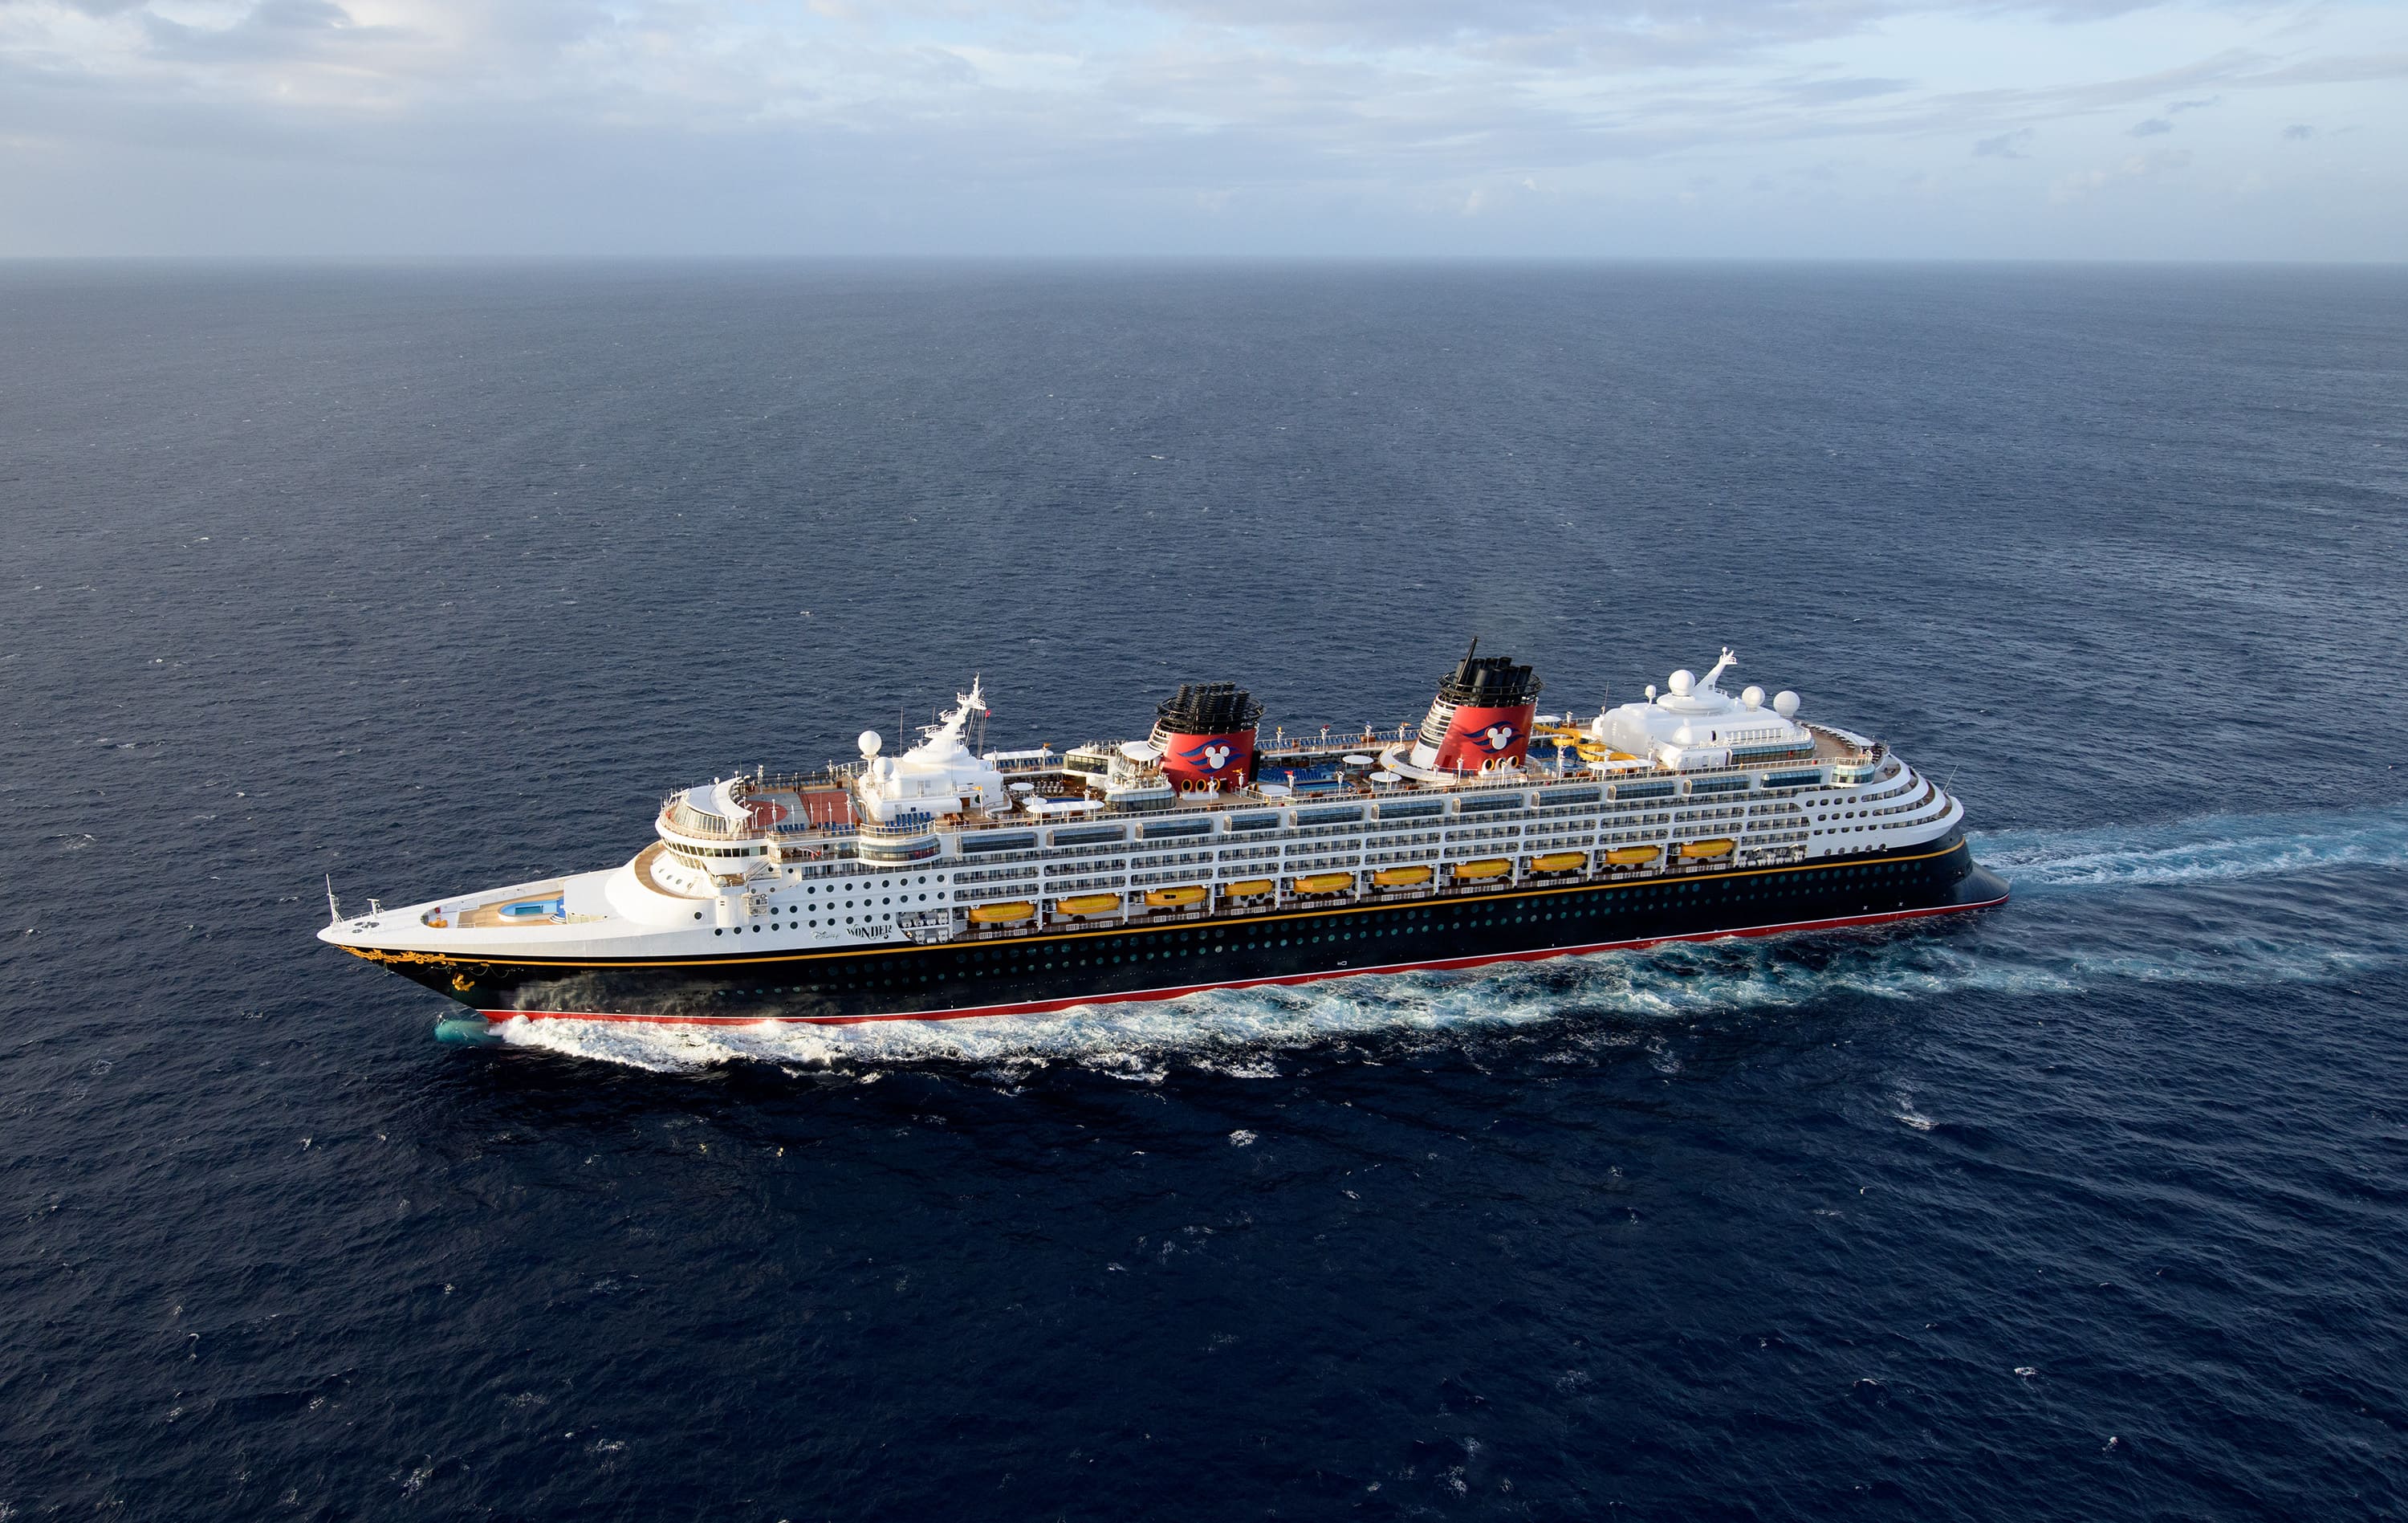 Why book a Disney cruise as a first time cruiser. See what a Disney cruise is like from the perspective of someone who had never cruised.